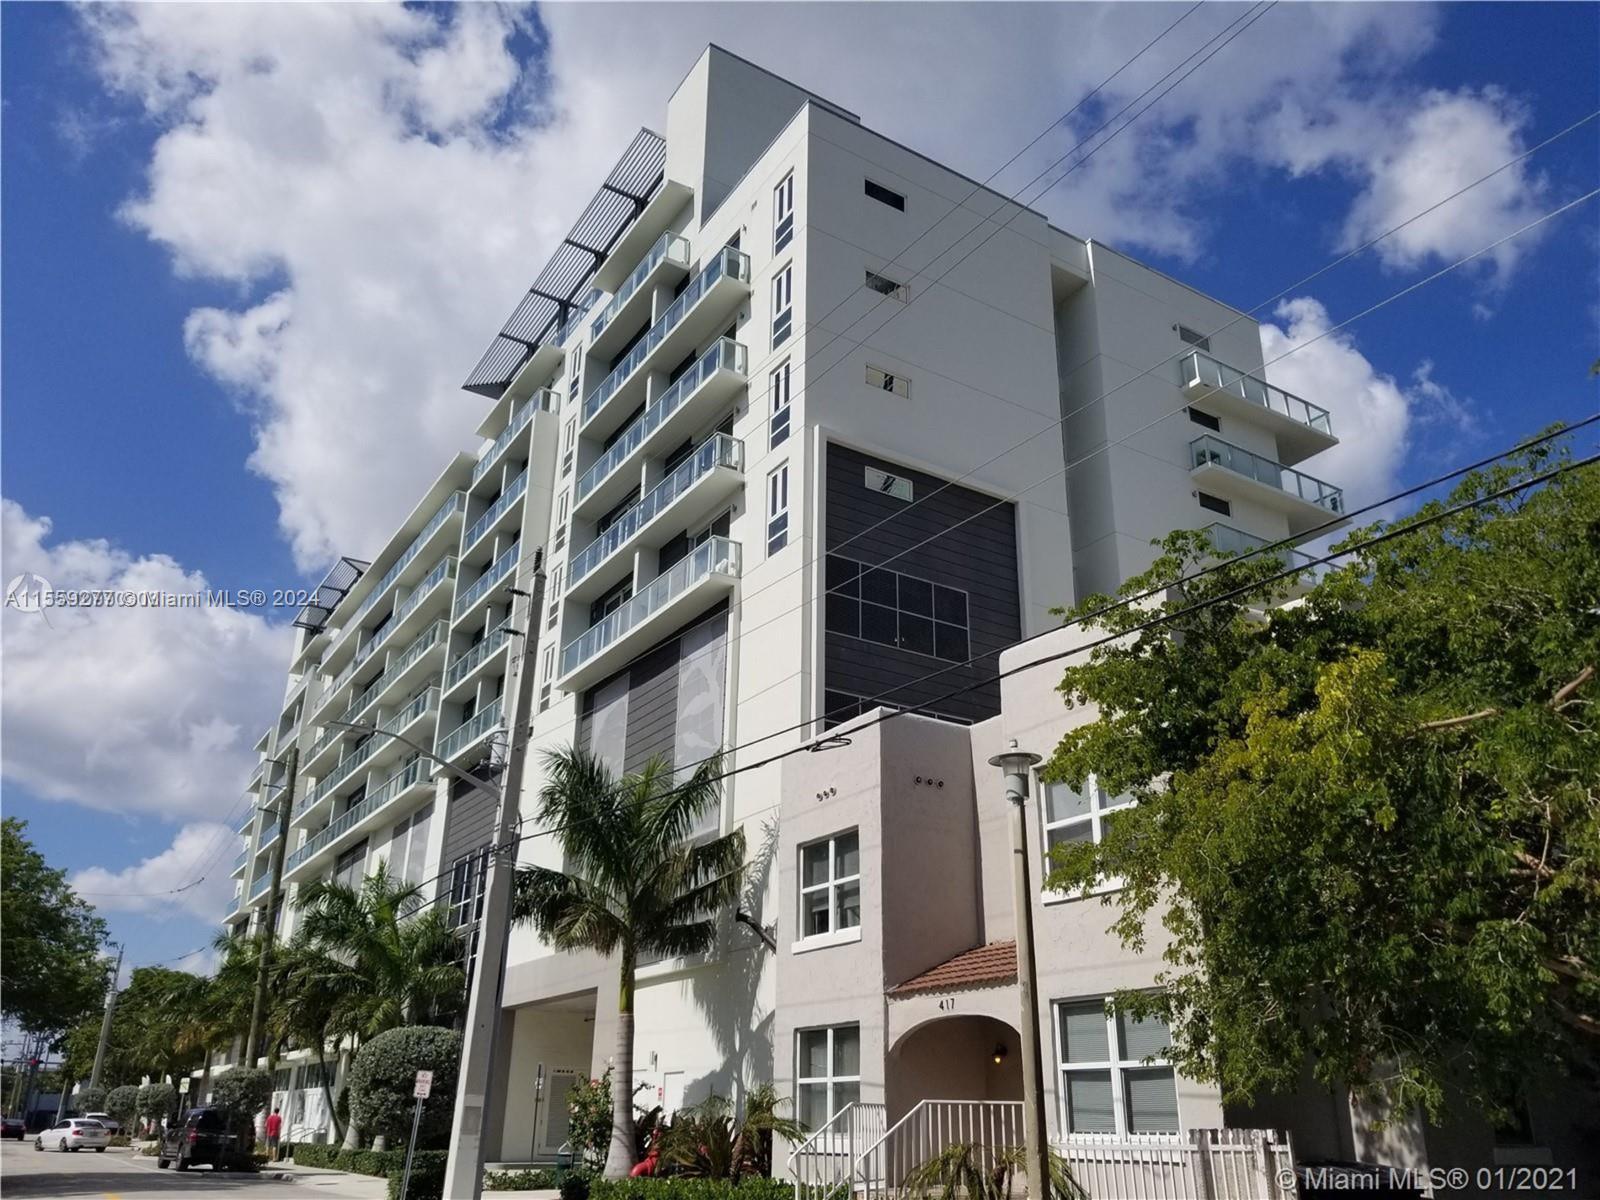 Impeccable unit in 26 Edgewater, boutique building located in the heart of Edgewater near several locations in the city. This one-bedroom unit available in Biscayne corridor, presents an incredible opportunity to live in the heart of Miami with several amenities including a rooftop pool, lounge area, sun deck, fitness center and party room. Impeccable conditions, stainless steel appliances just for you!.